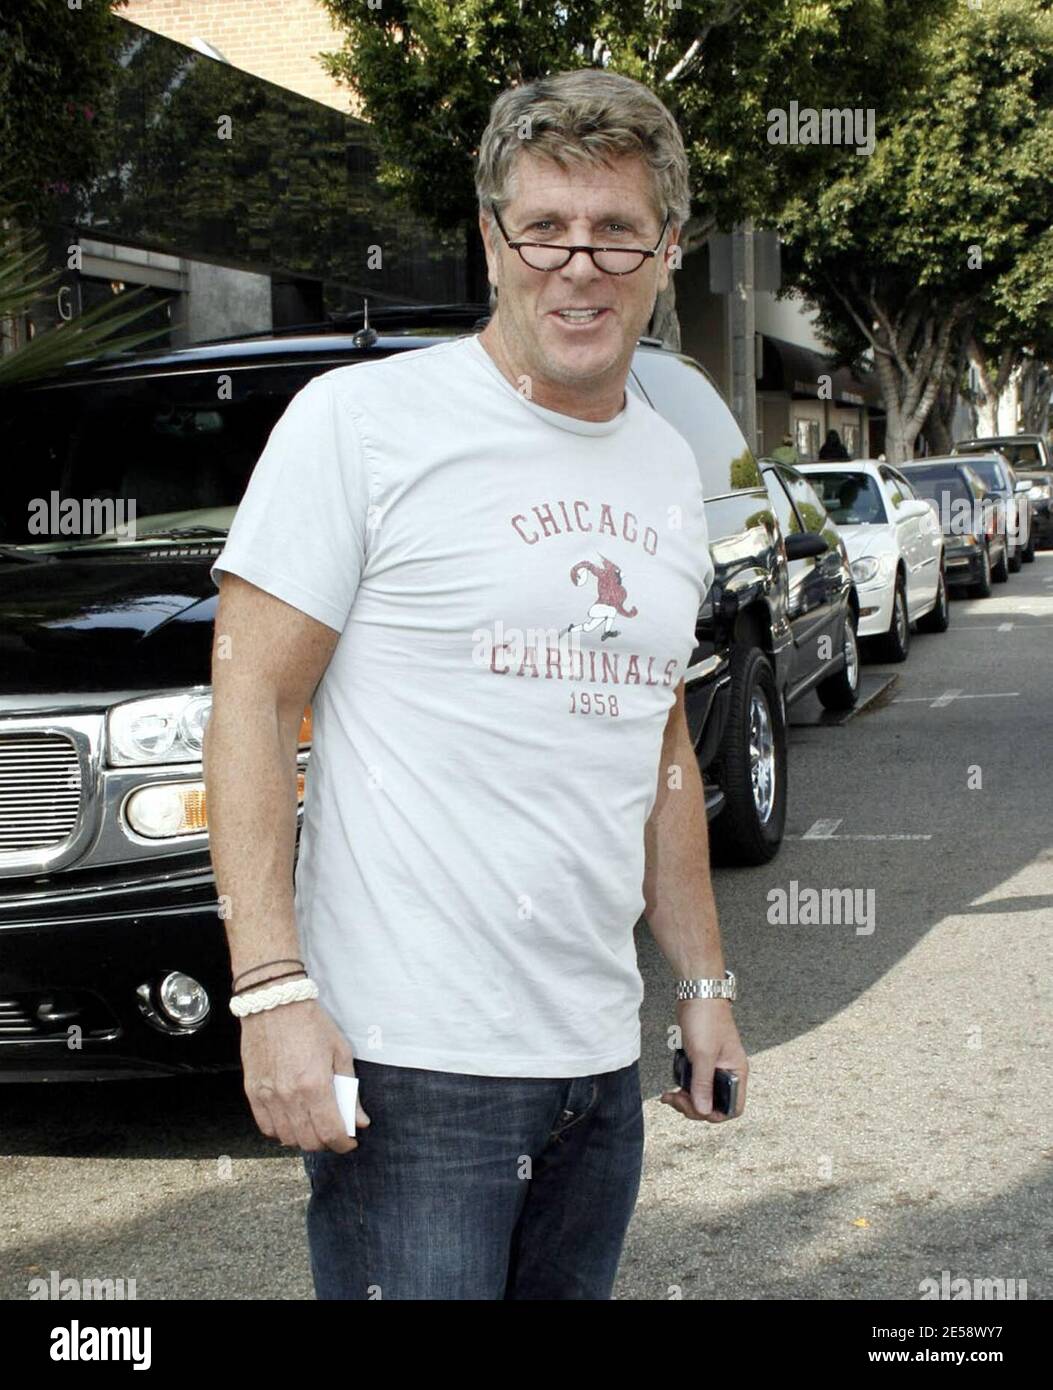 Exclusive!! Donny Deutsch, advertising executive and host of the CNBC talk show 'The Big Idea With Donny Deutsch,' met friends on Robertson Blvd. before heading elsewhere for lunch. West Hollywood, Calif. 11/09/07.    [[wam]] Stock Photo